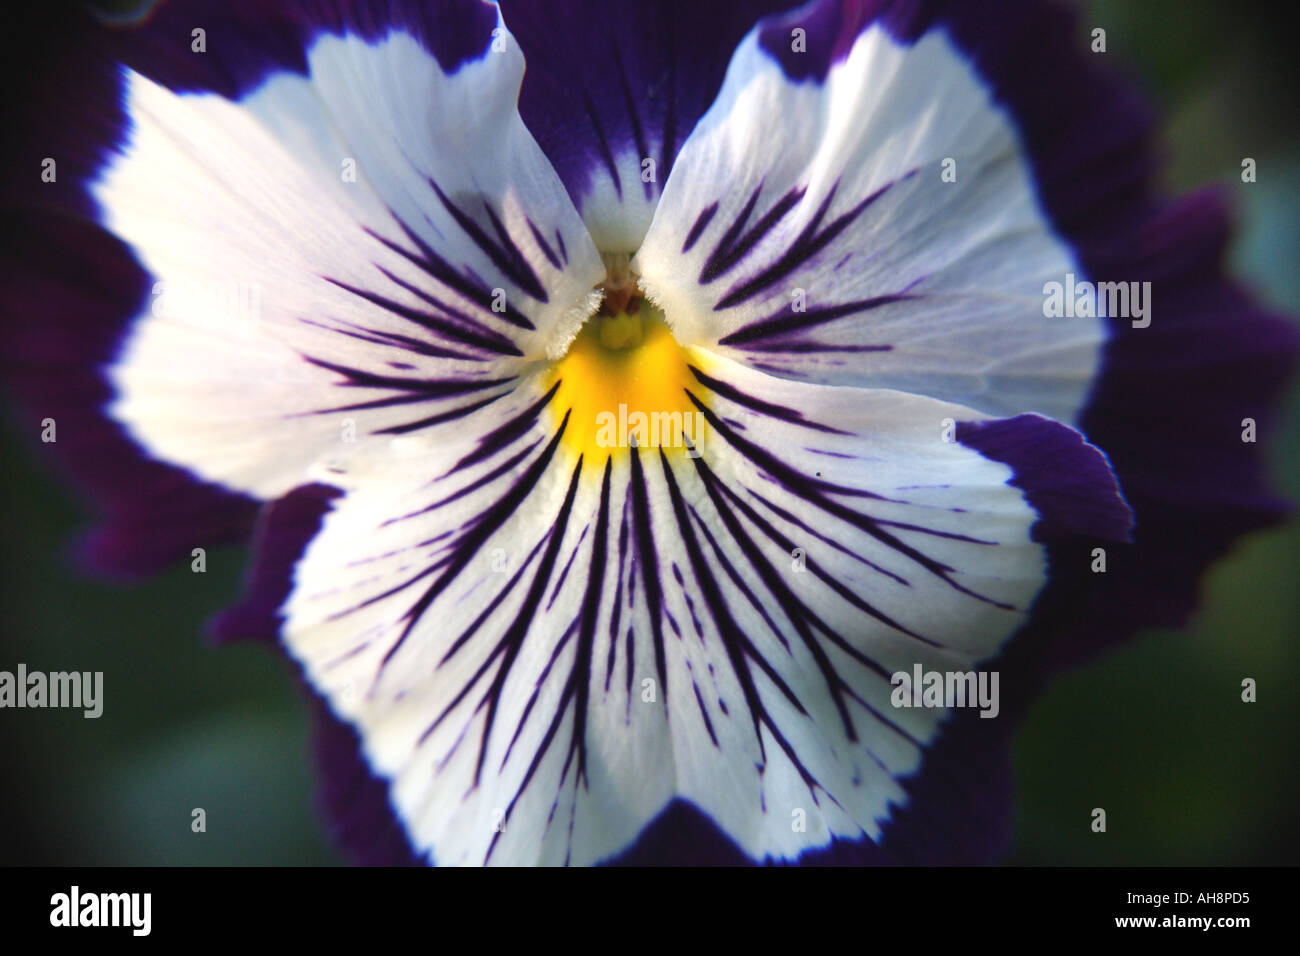 A PURPLE AND WHITE PANSY BAPD 2613 Stock Photo